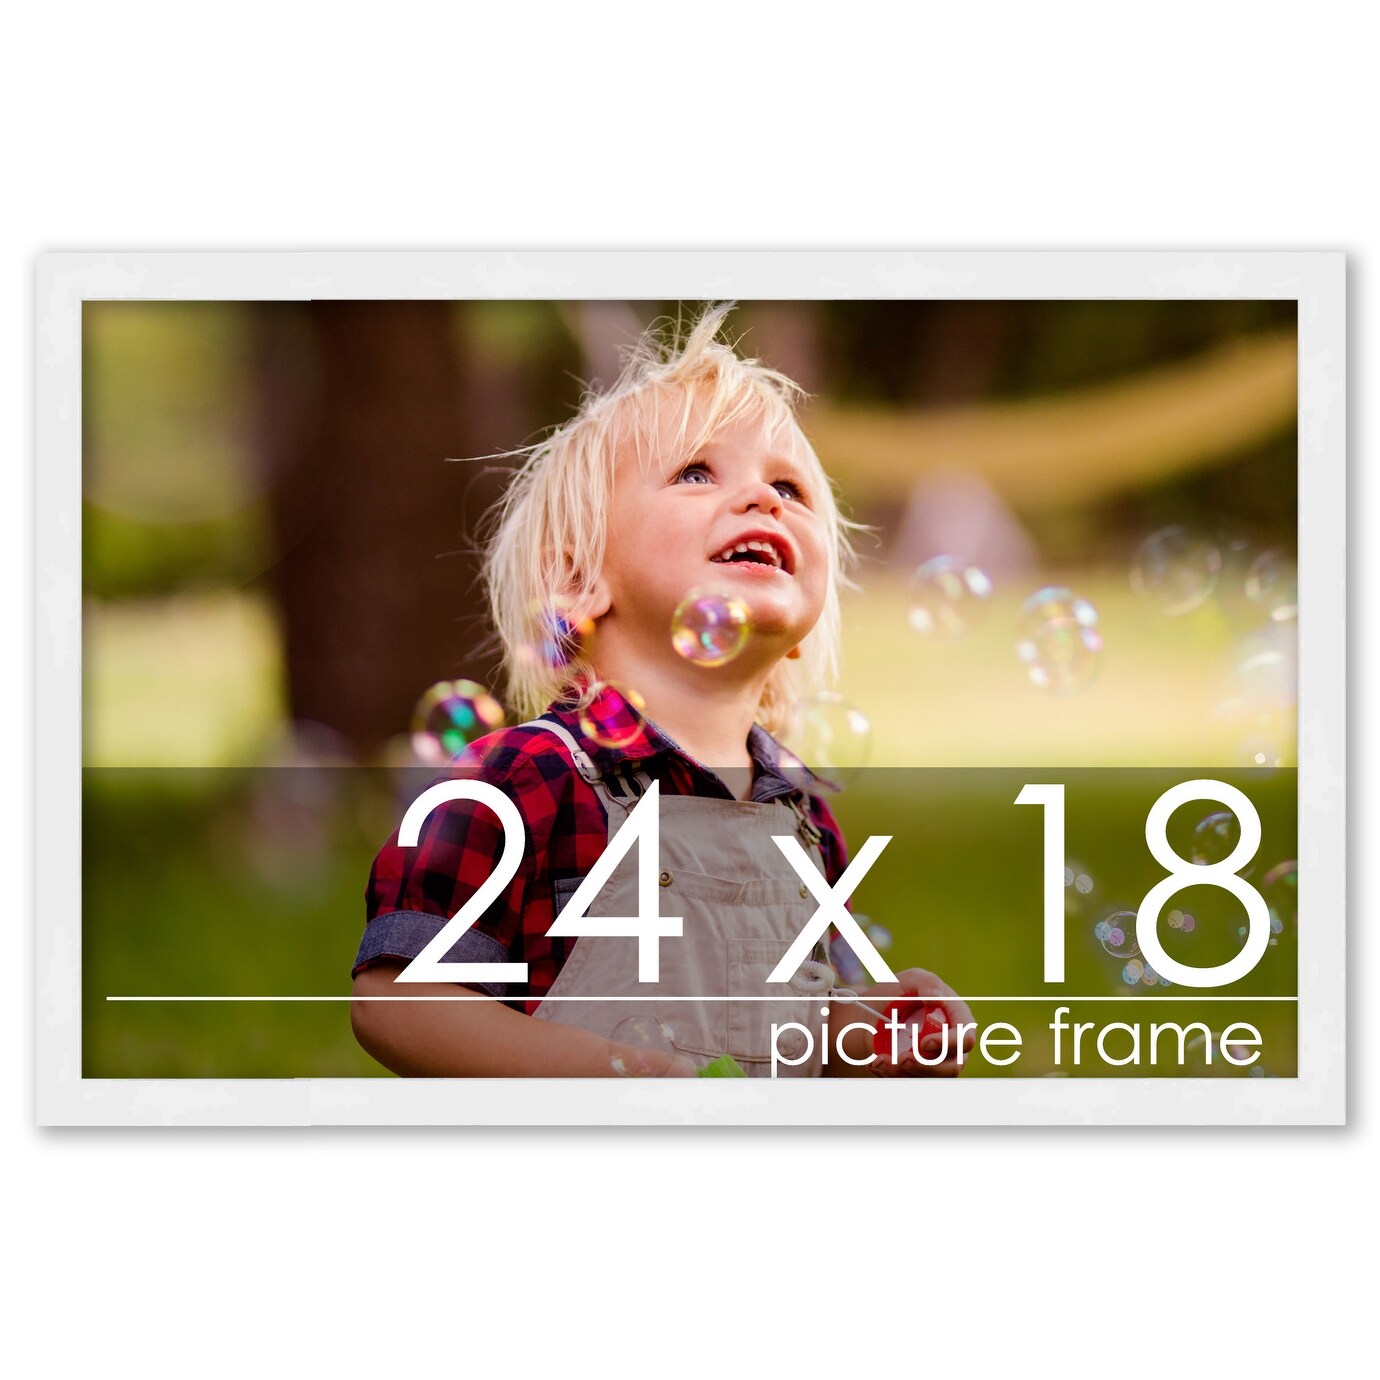 19x31 White Barnwood Picture Frame - with Acrylic Front and Foam Board Backing